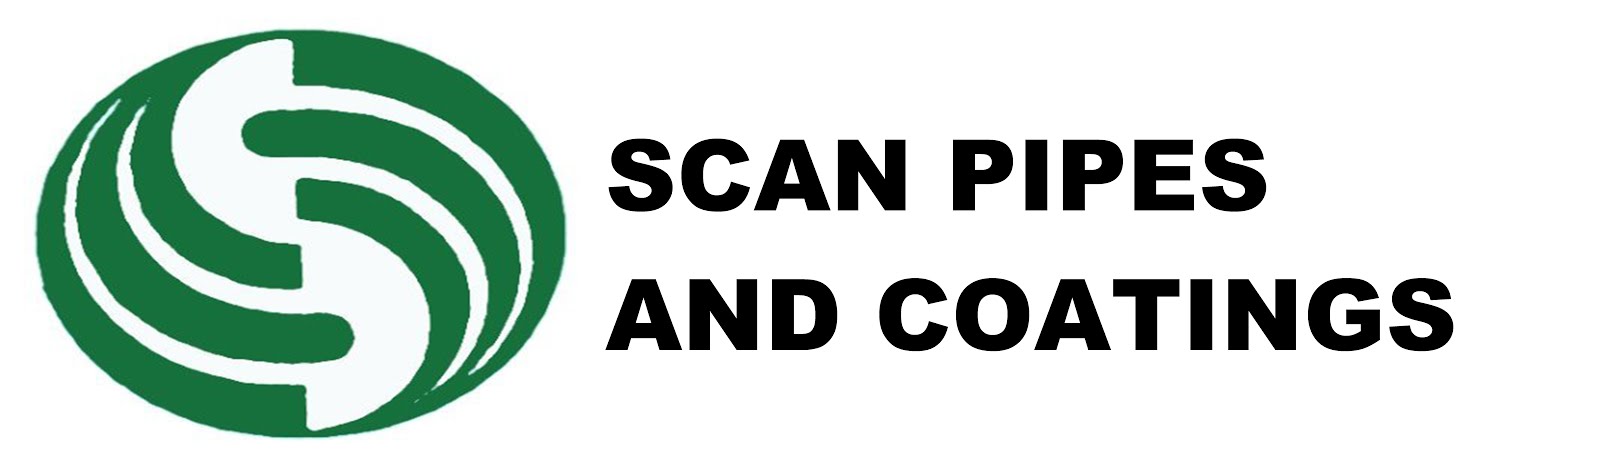 Scan Pipes And Coatings